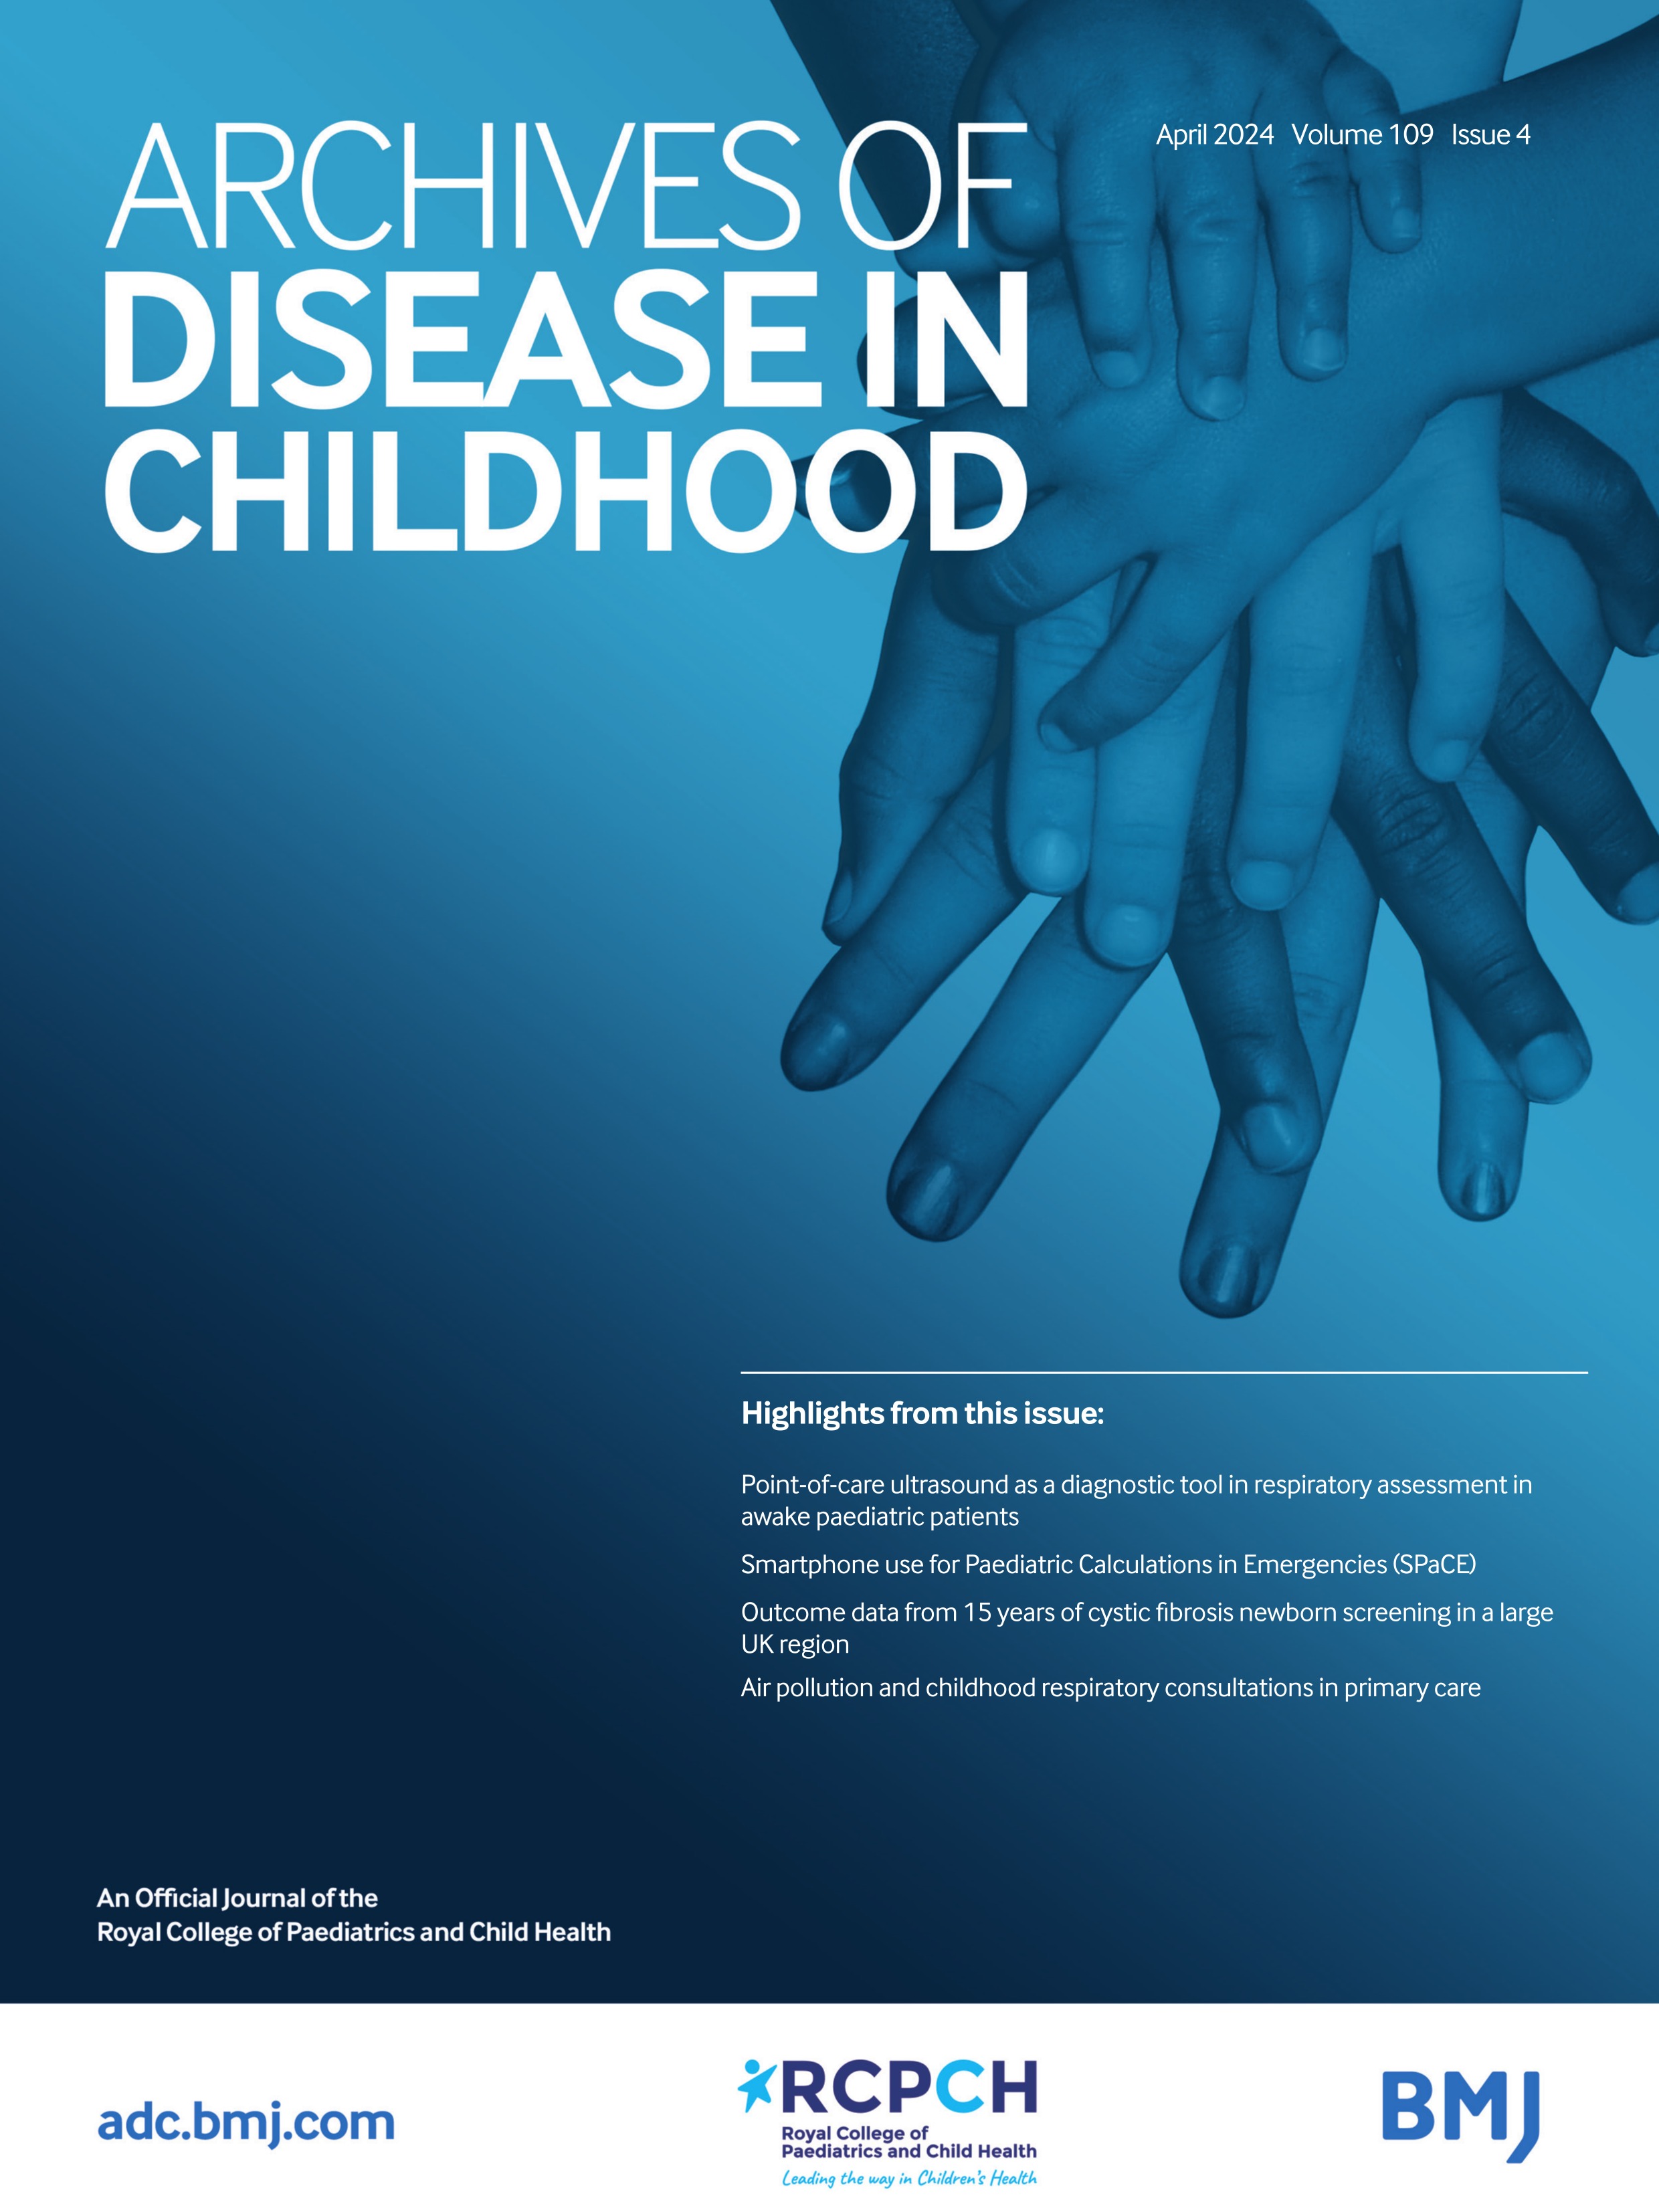 Point-of-care ultrasound to assess degree of dehydration in children: a systematic review with meta-analysis